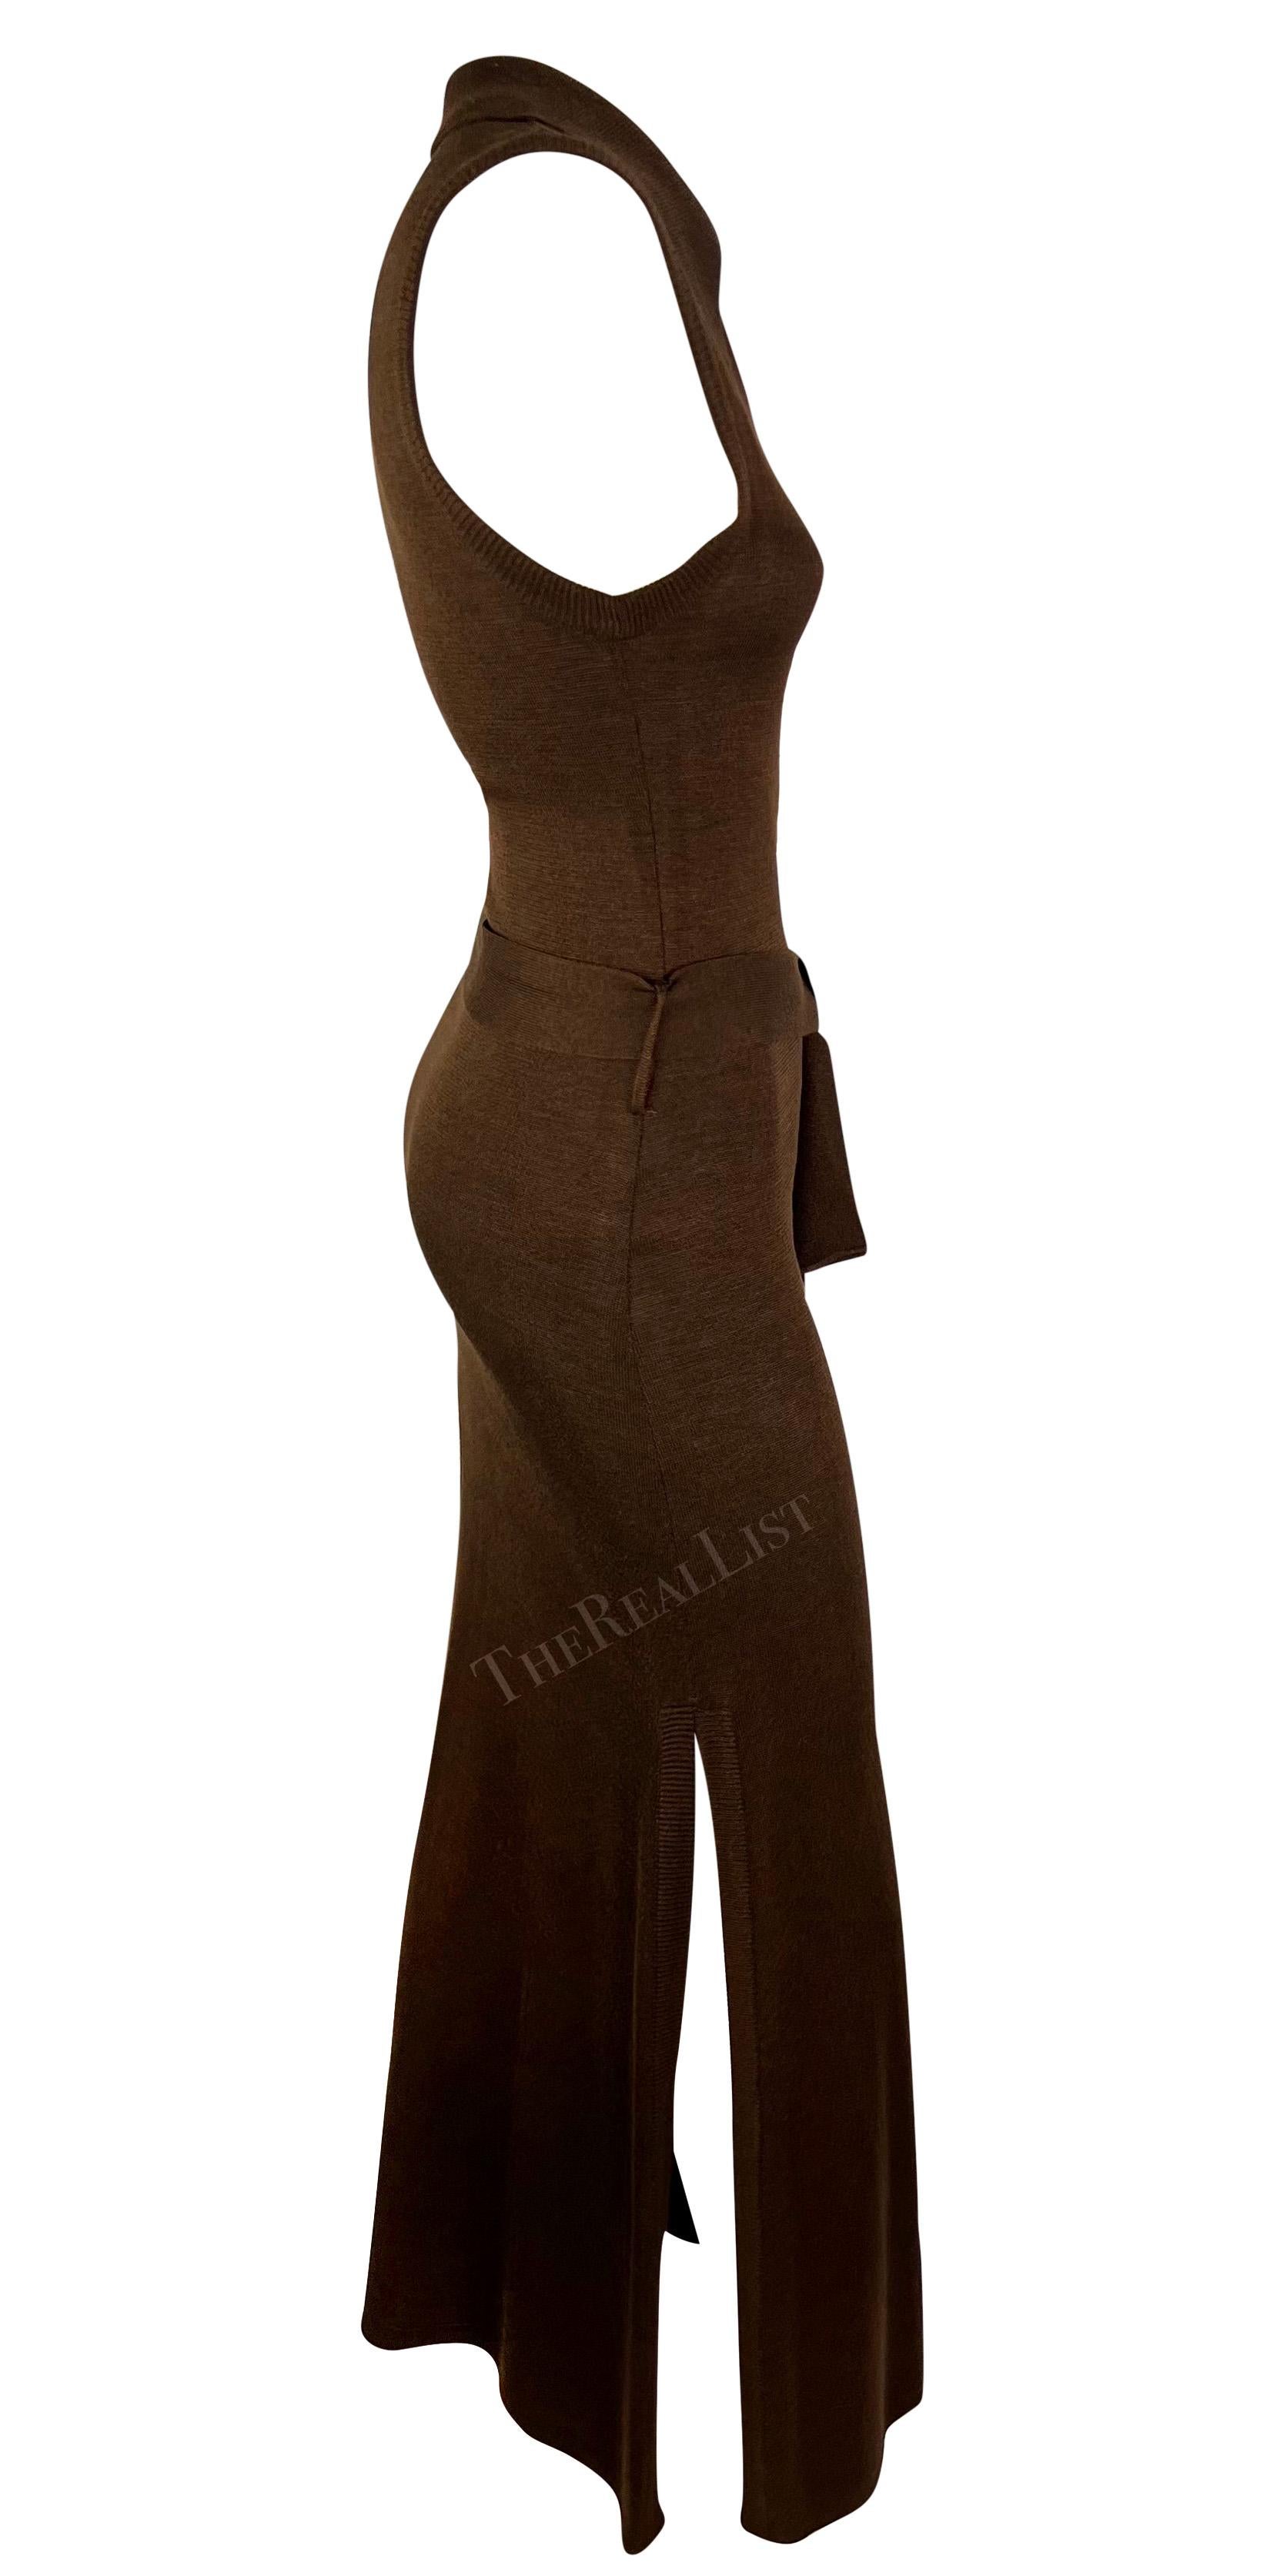 S/S 1996 Dolce & Gabbana Runway Brown Knit Bodycon Belted Maxi Collared Dress For Sale 4